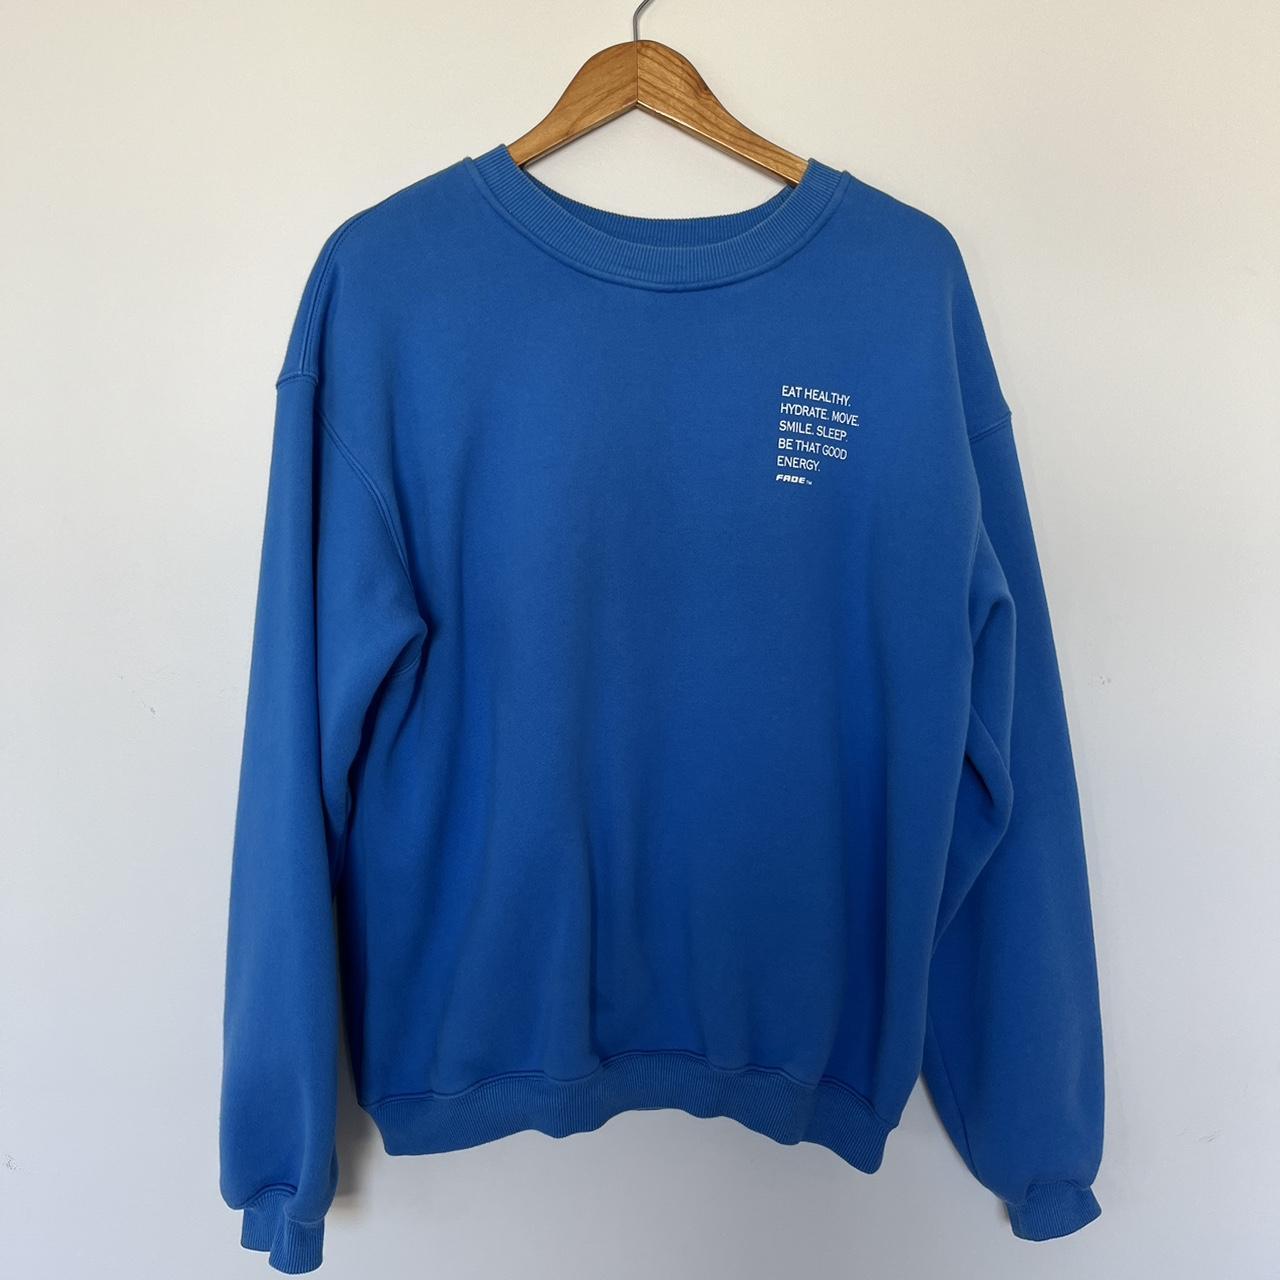 Fade active jumper blue Size M Is an oversized fit... - Depop